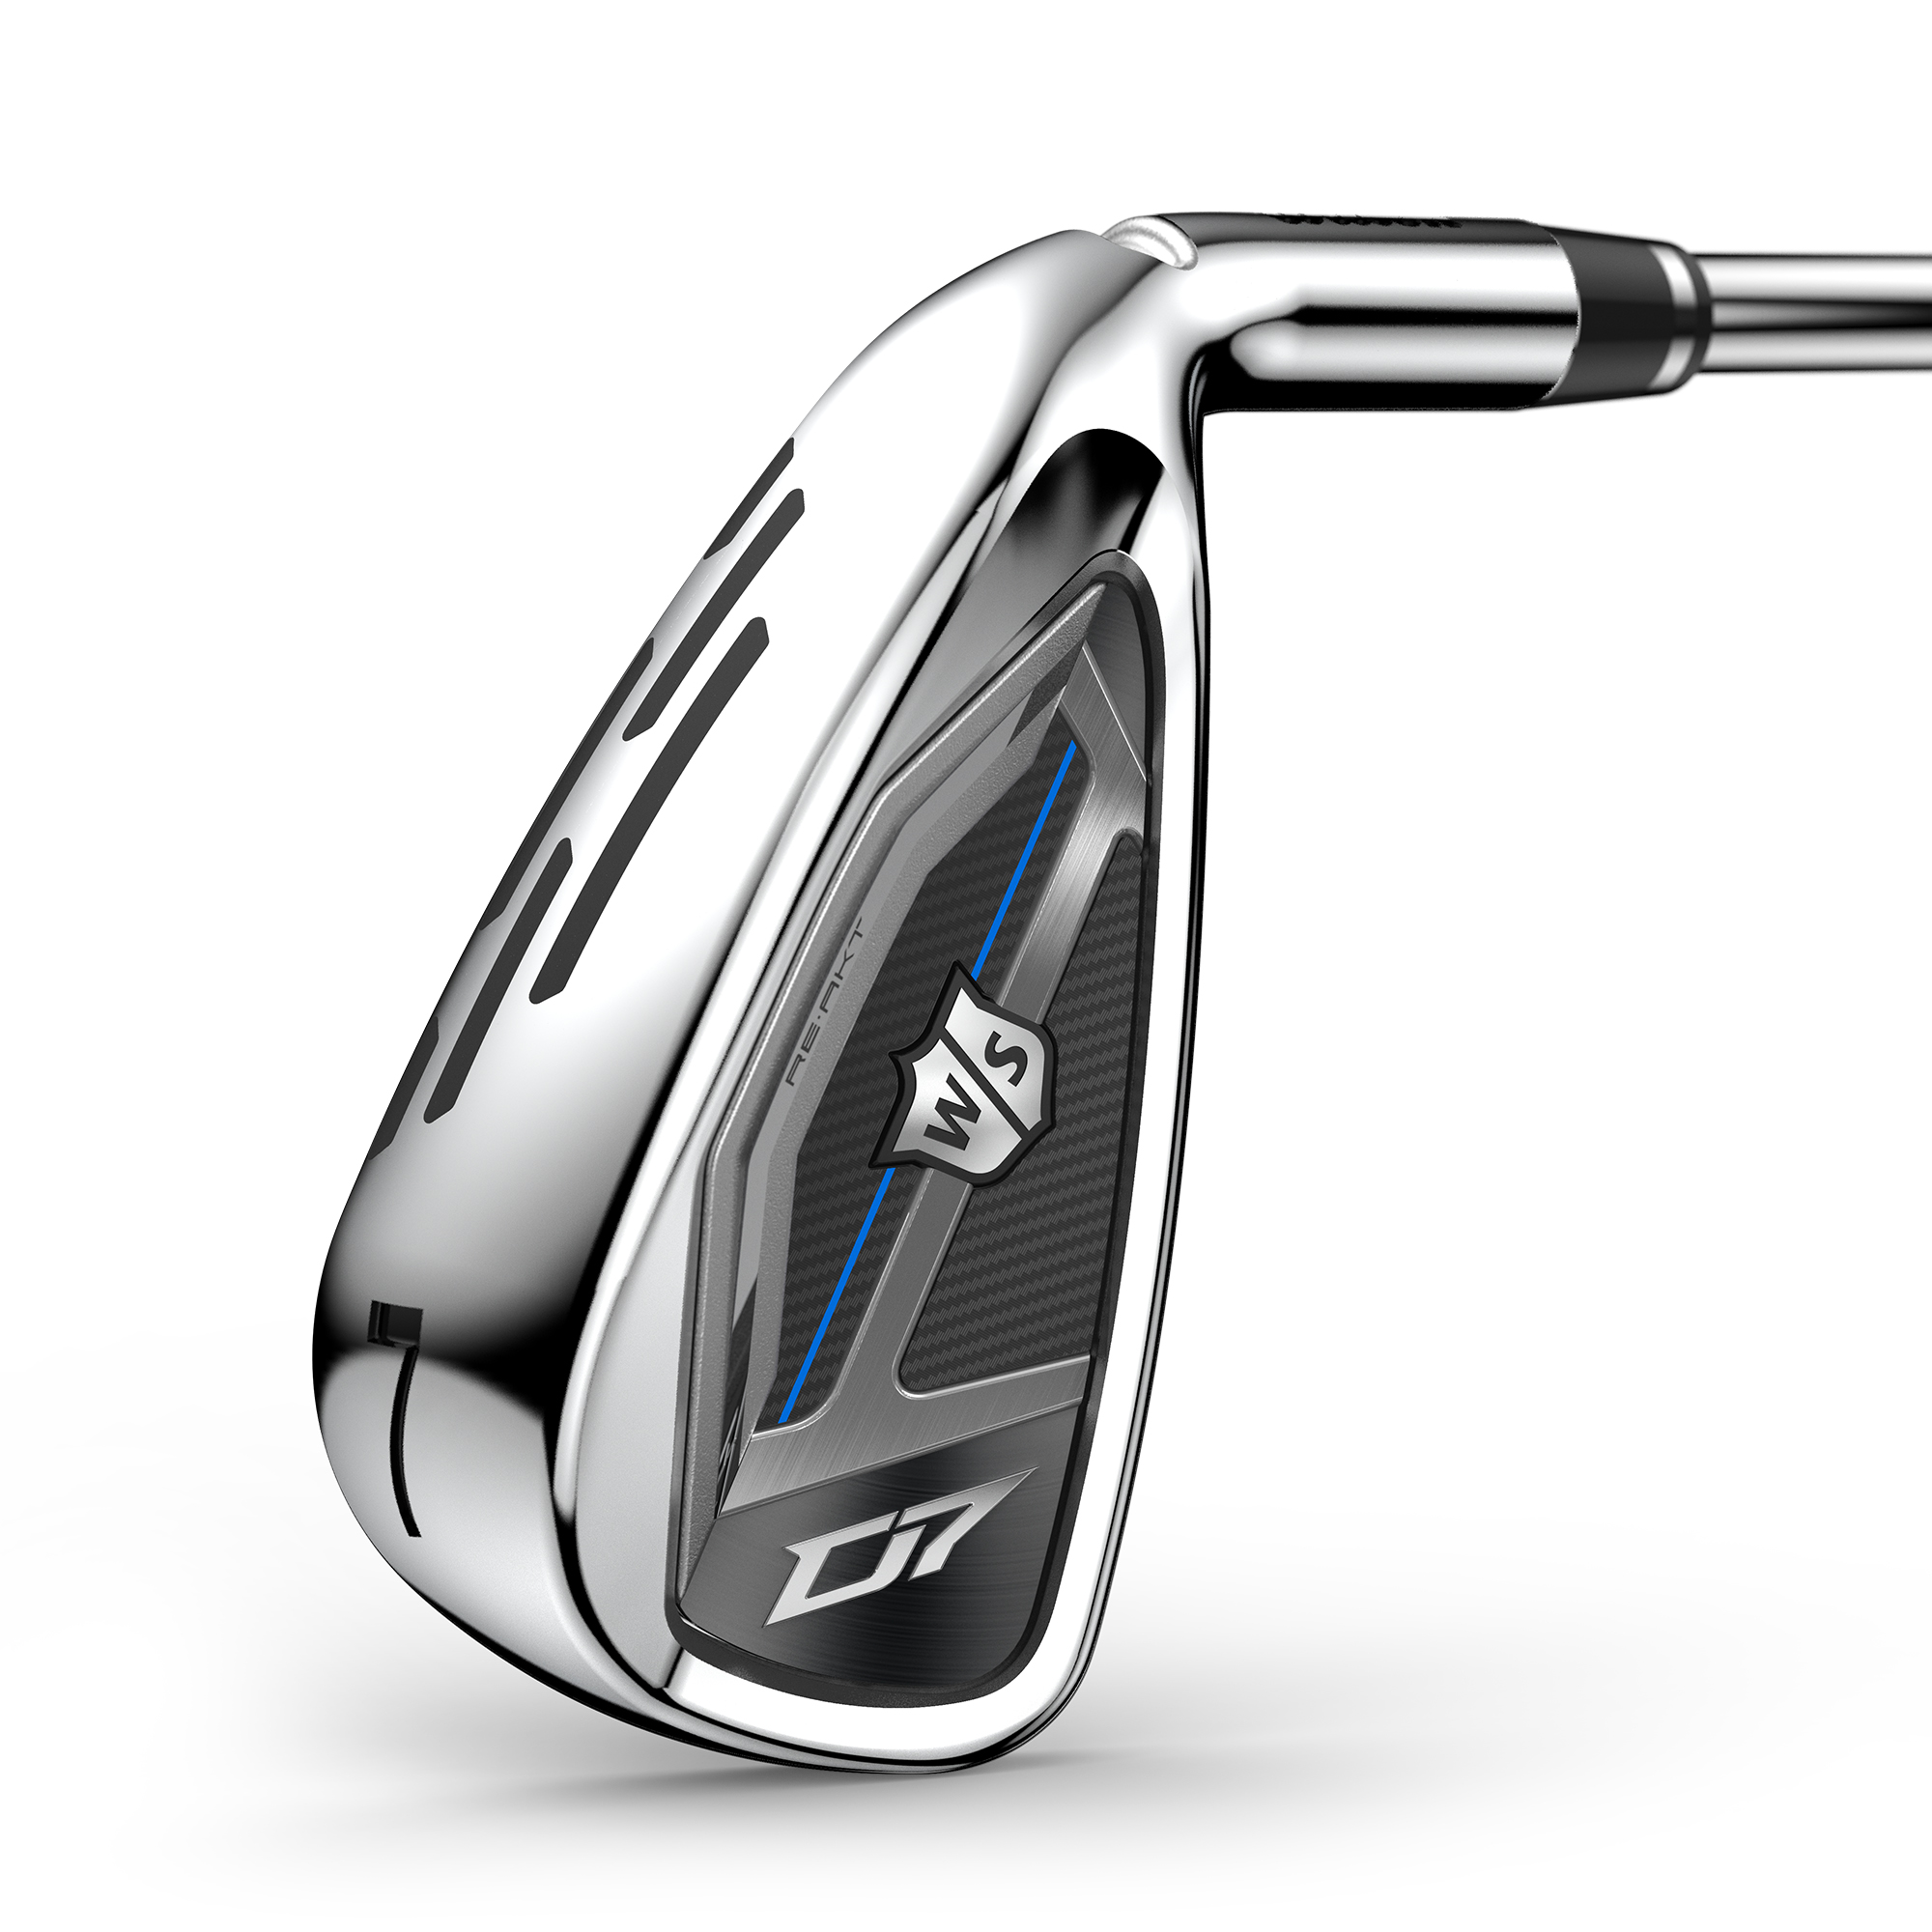 Wilson D7 Irons set pace in “players distance” category